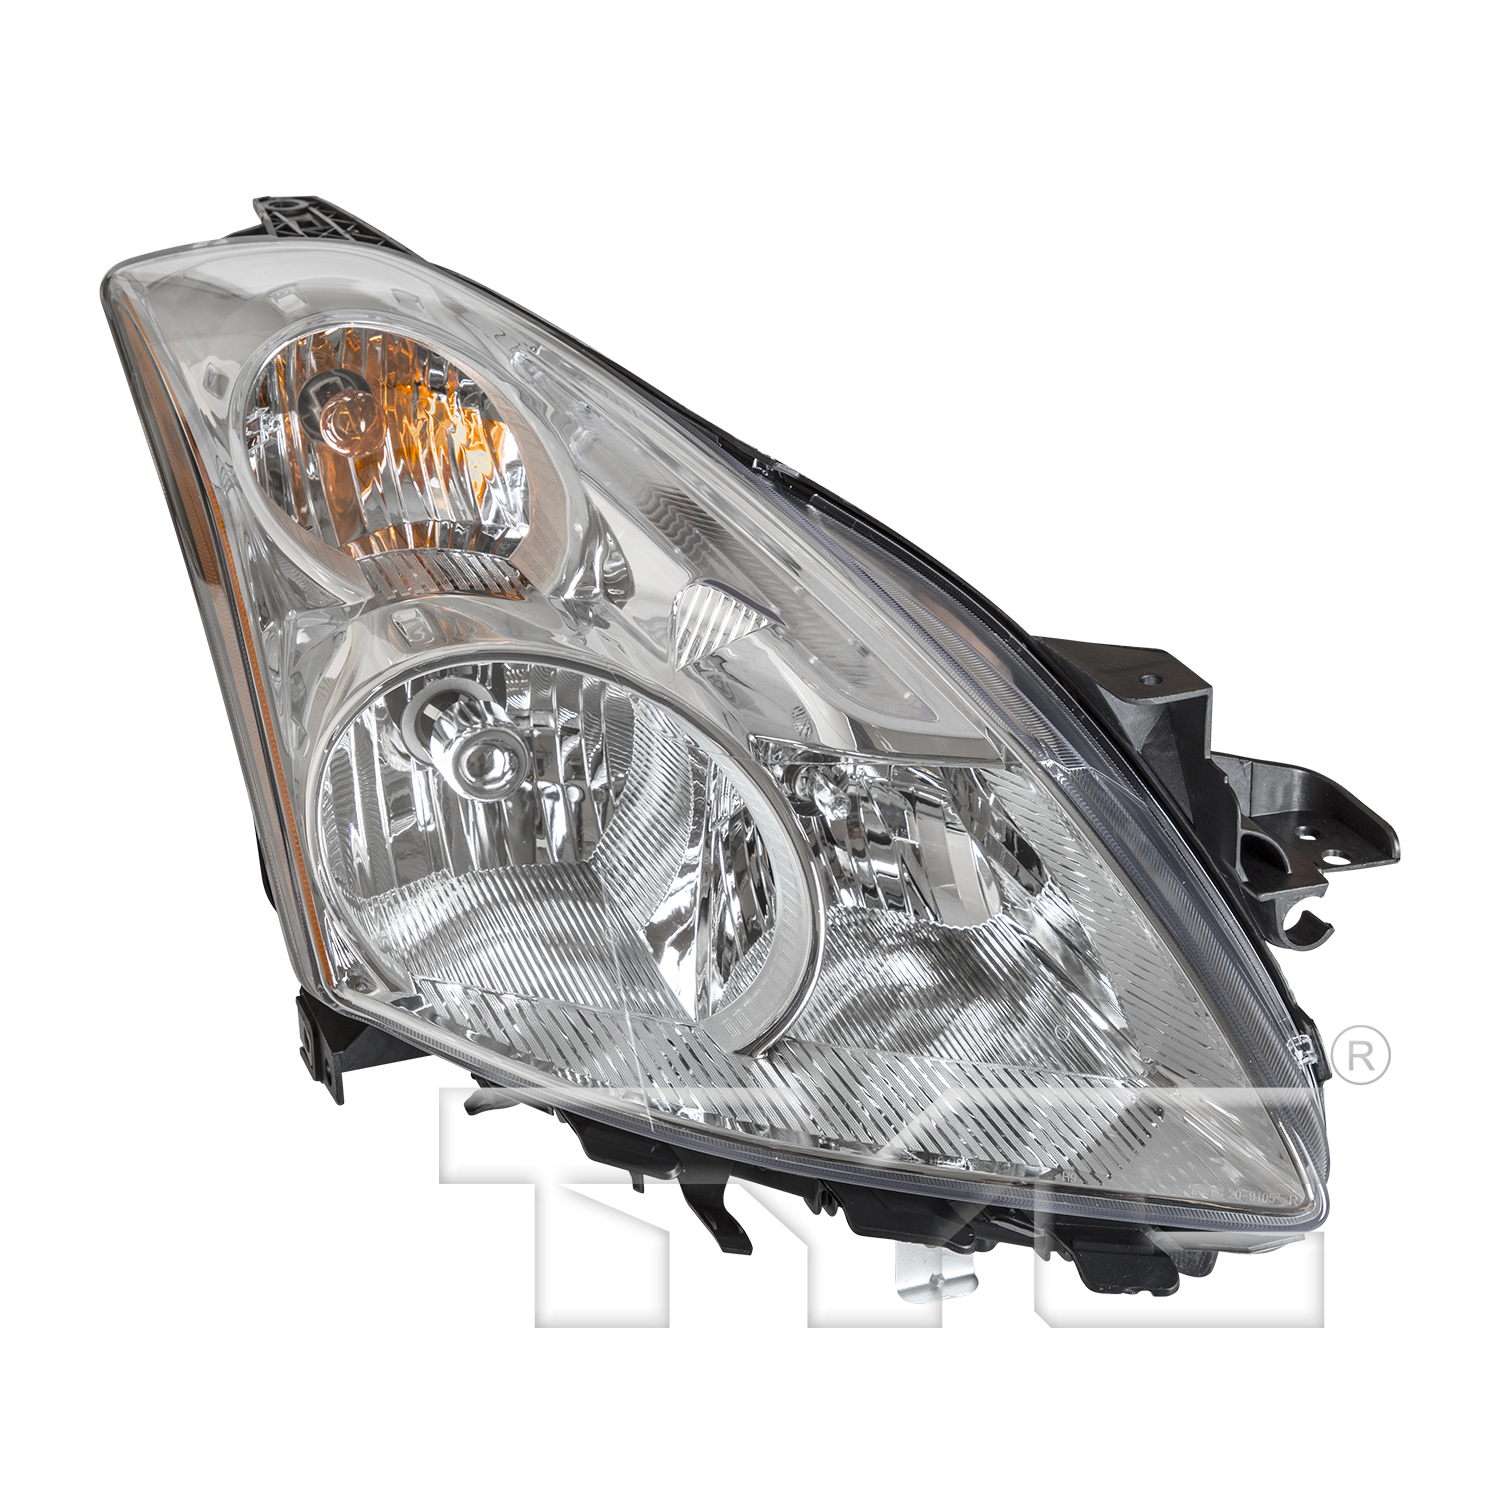 Aftermarket HEADLIGHTS for NISSAN - ALTIMA, ALTIMA,10-12,RT Headlamp assy composite